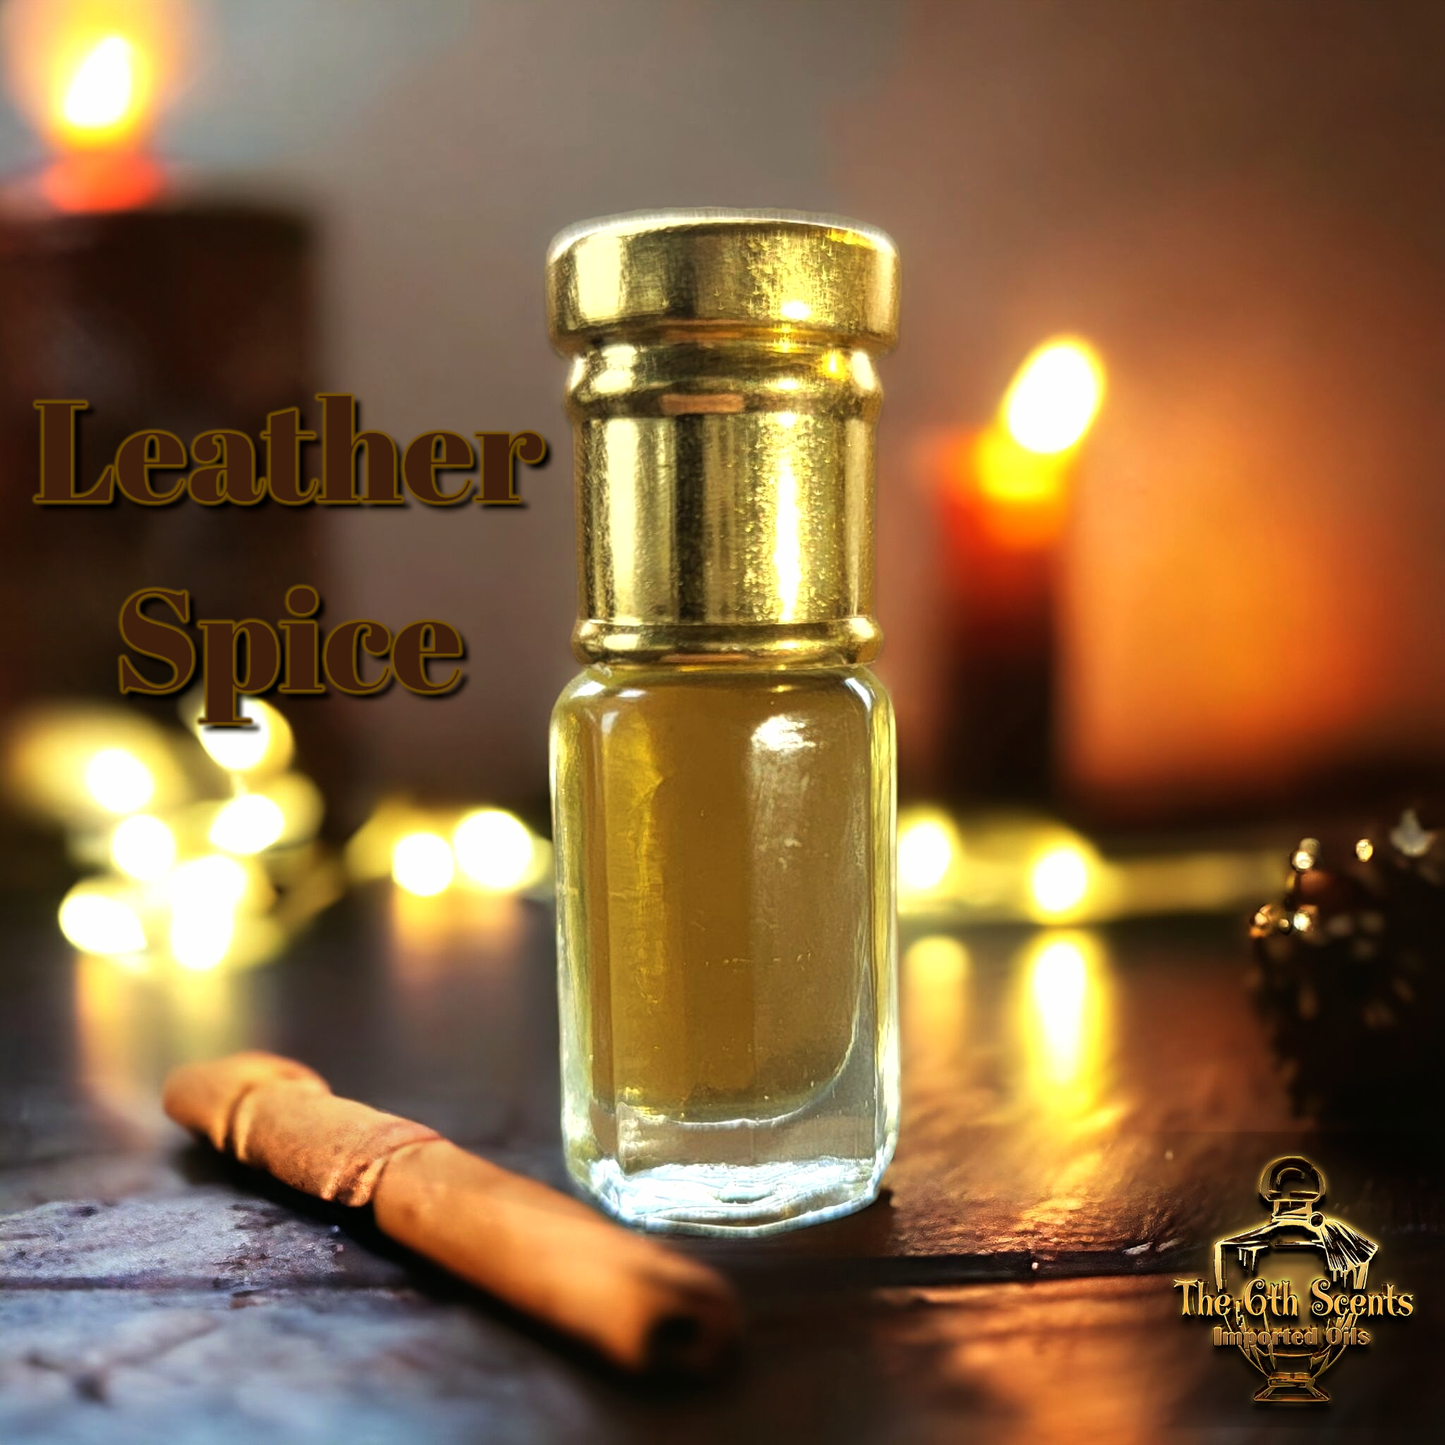 Leather Spice